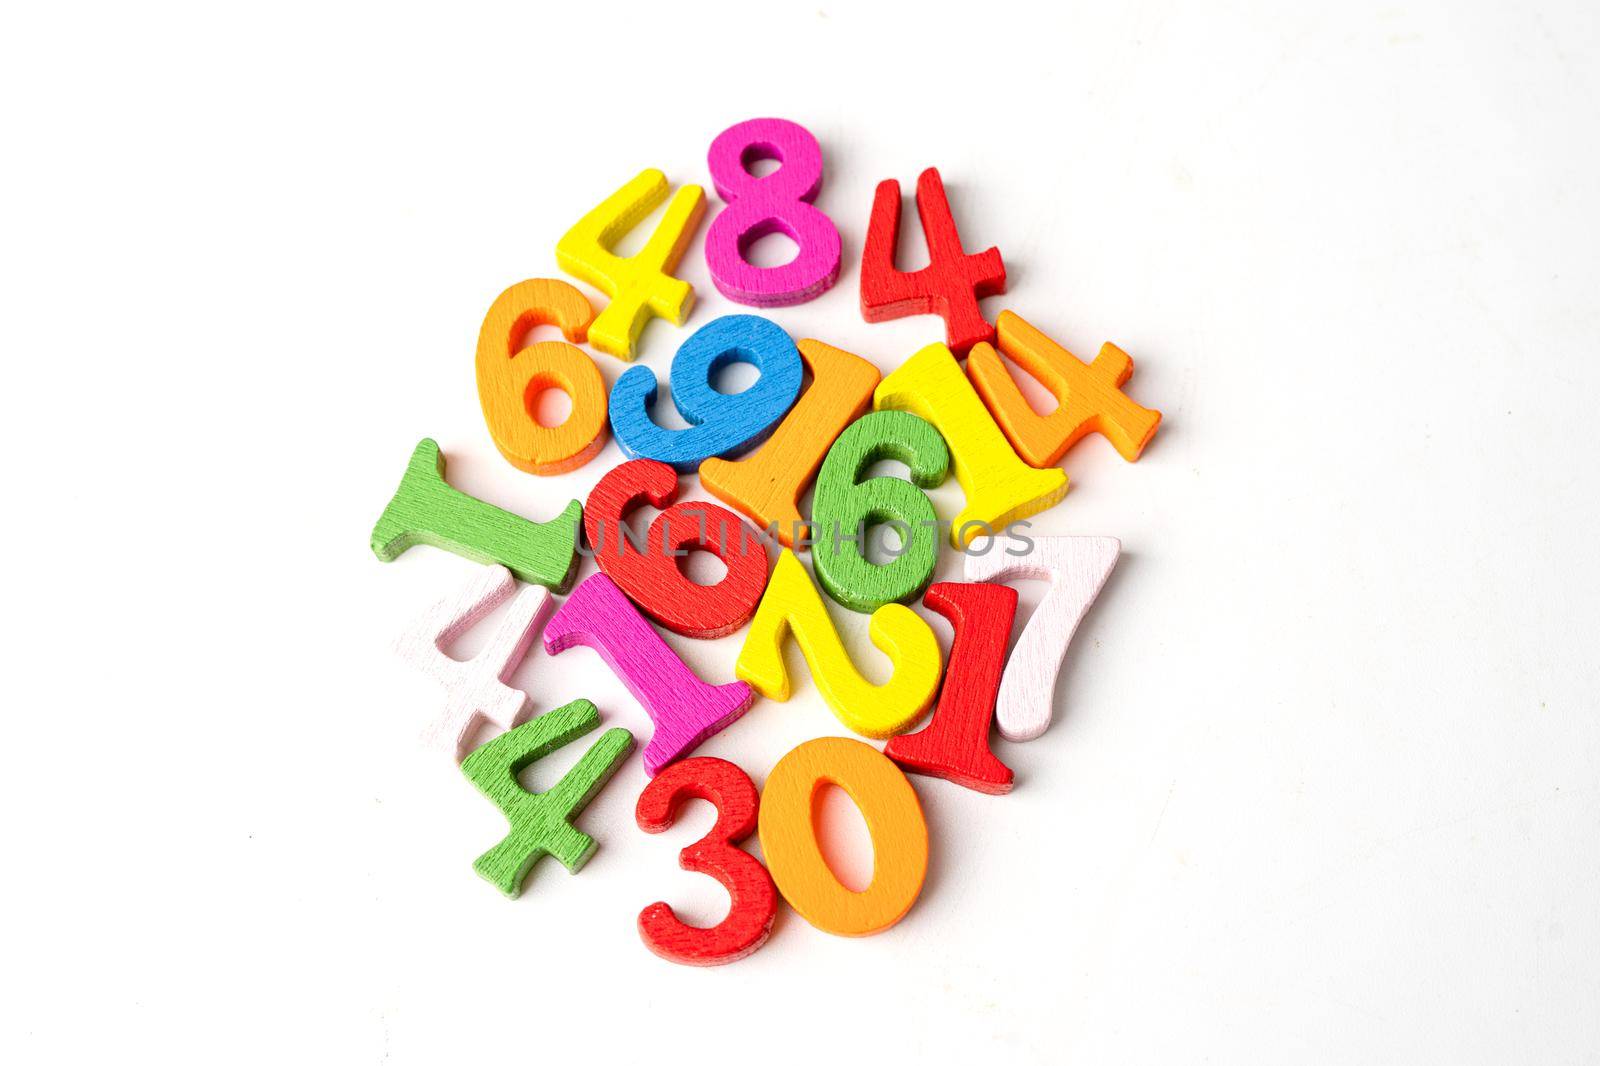 Math Number colorful on white background, education study mathematics learning teach concept. by pamai